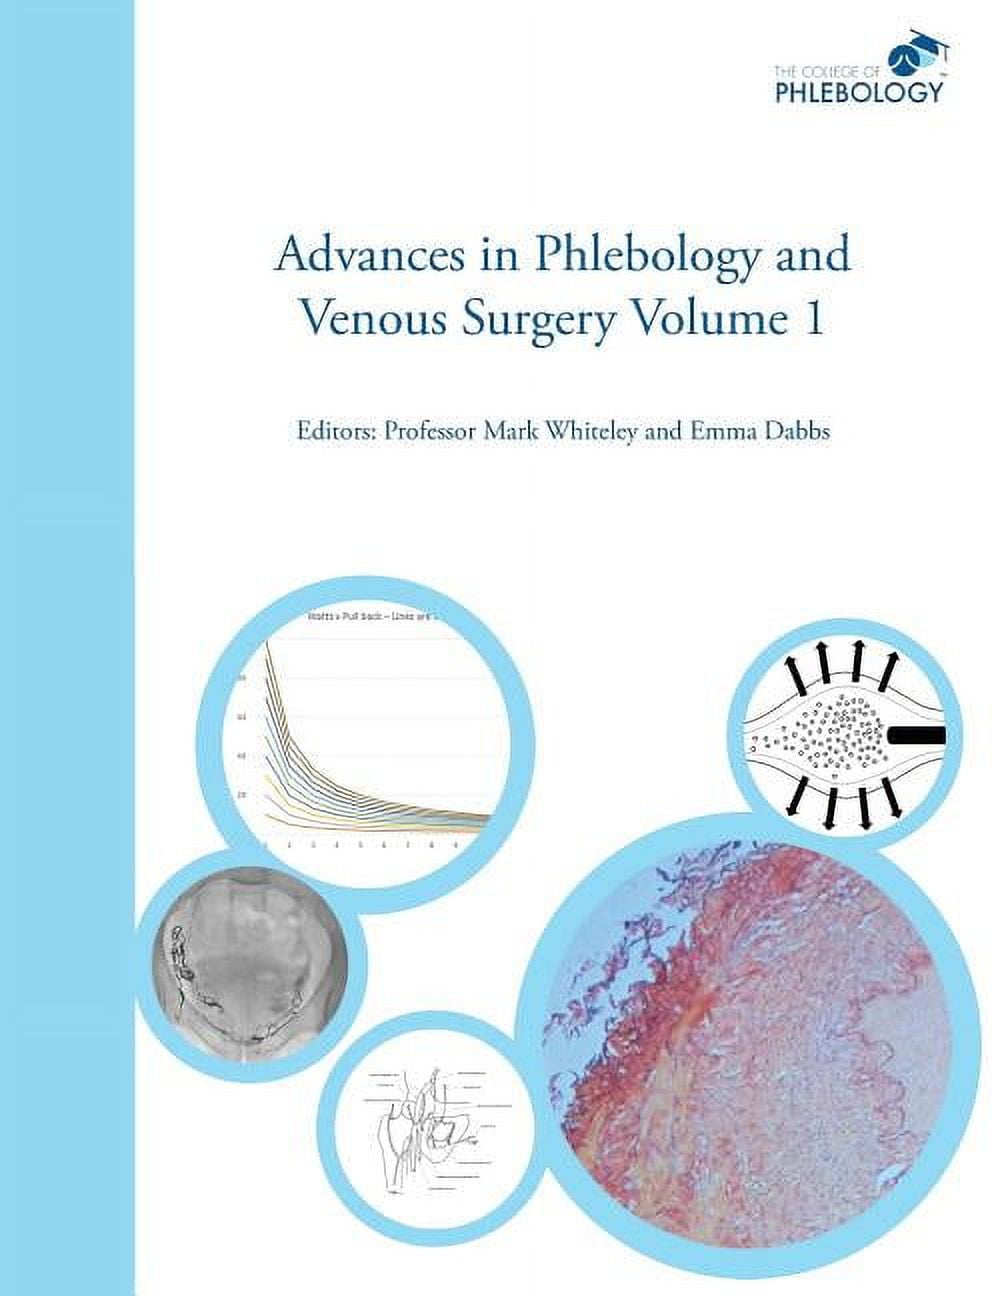 Advances in Phlebology and Venous Surgery Volume 1 (Hardcover) 